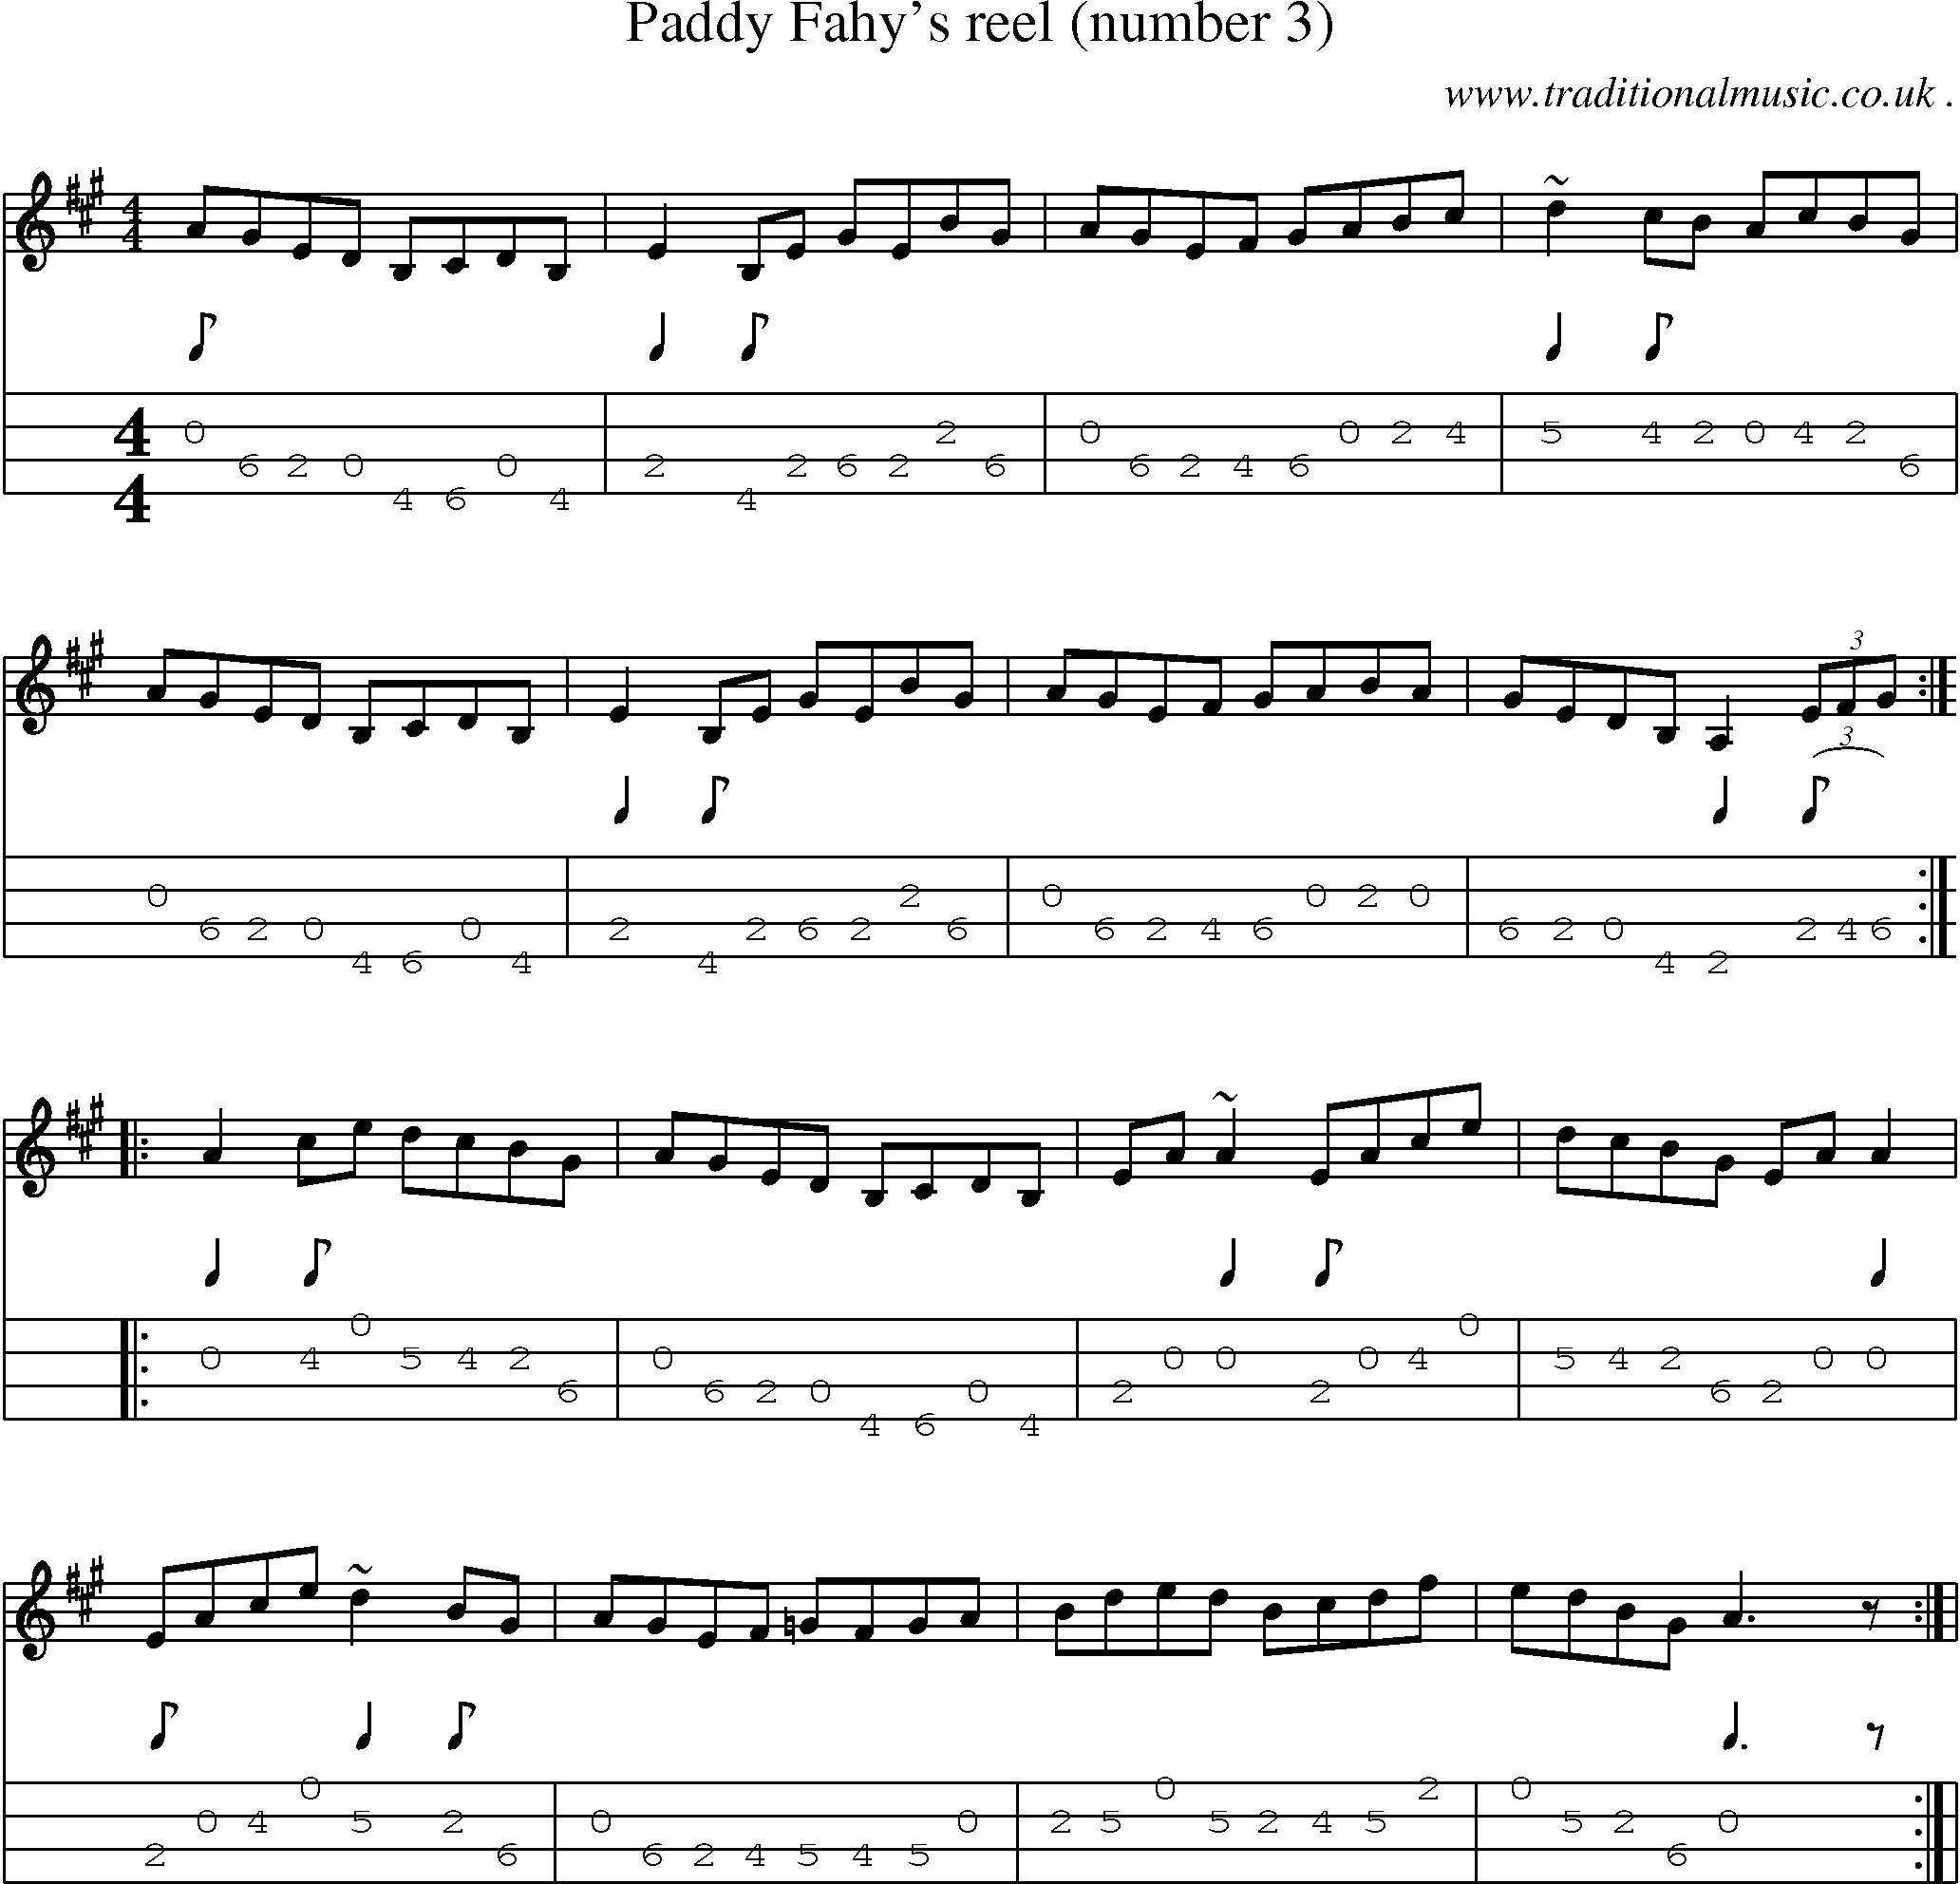 Sheet-music  score, Chords and Mandolin Tabs for Paddy Fahys Reel Number 3